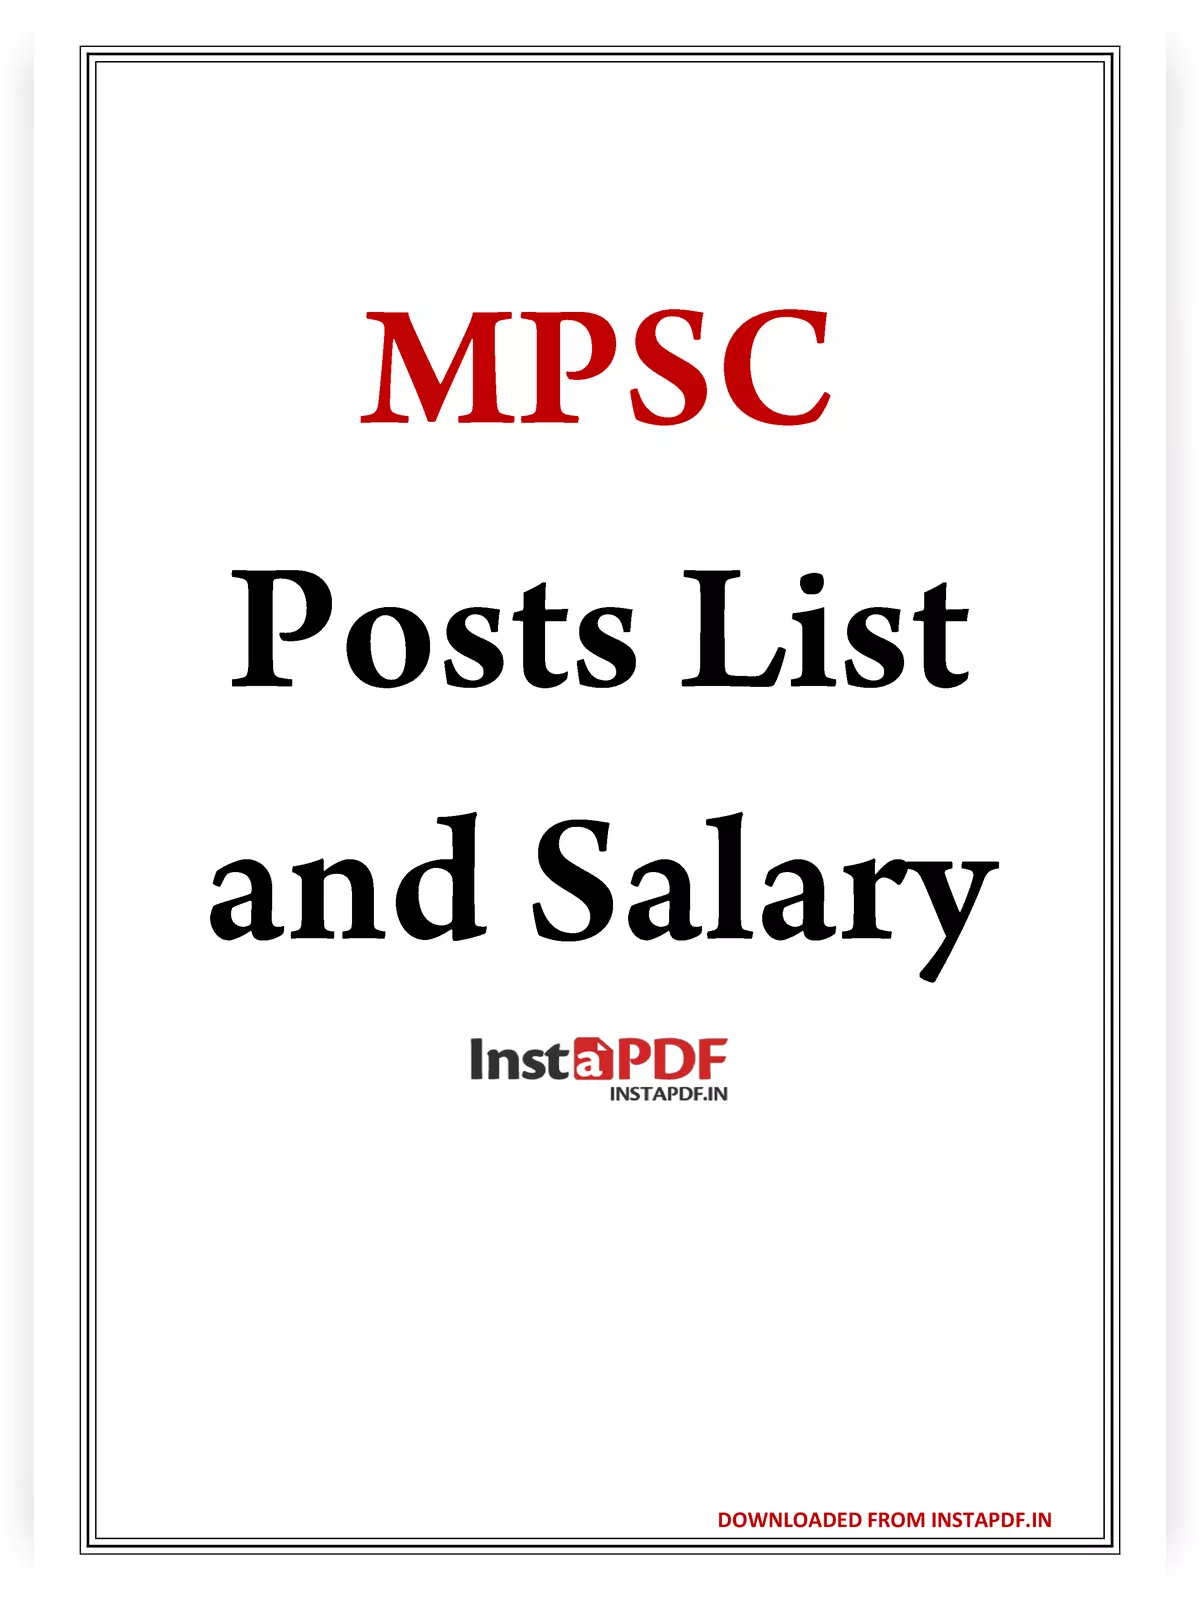 MPSC Posts List and Salary